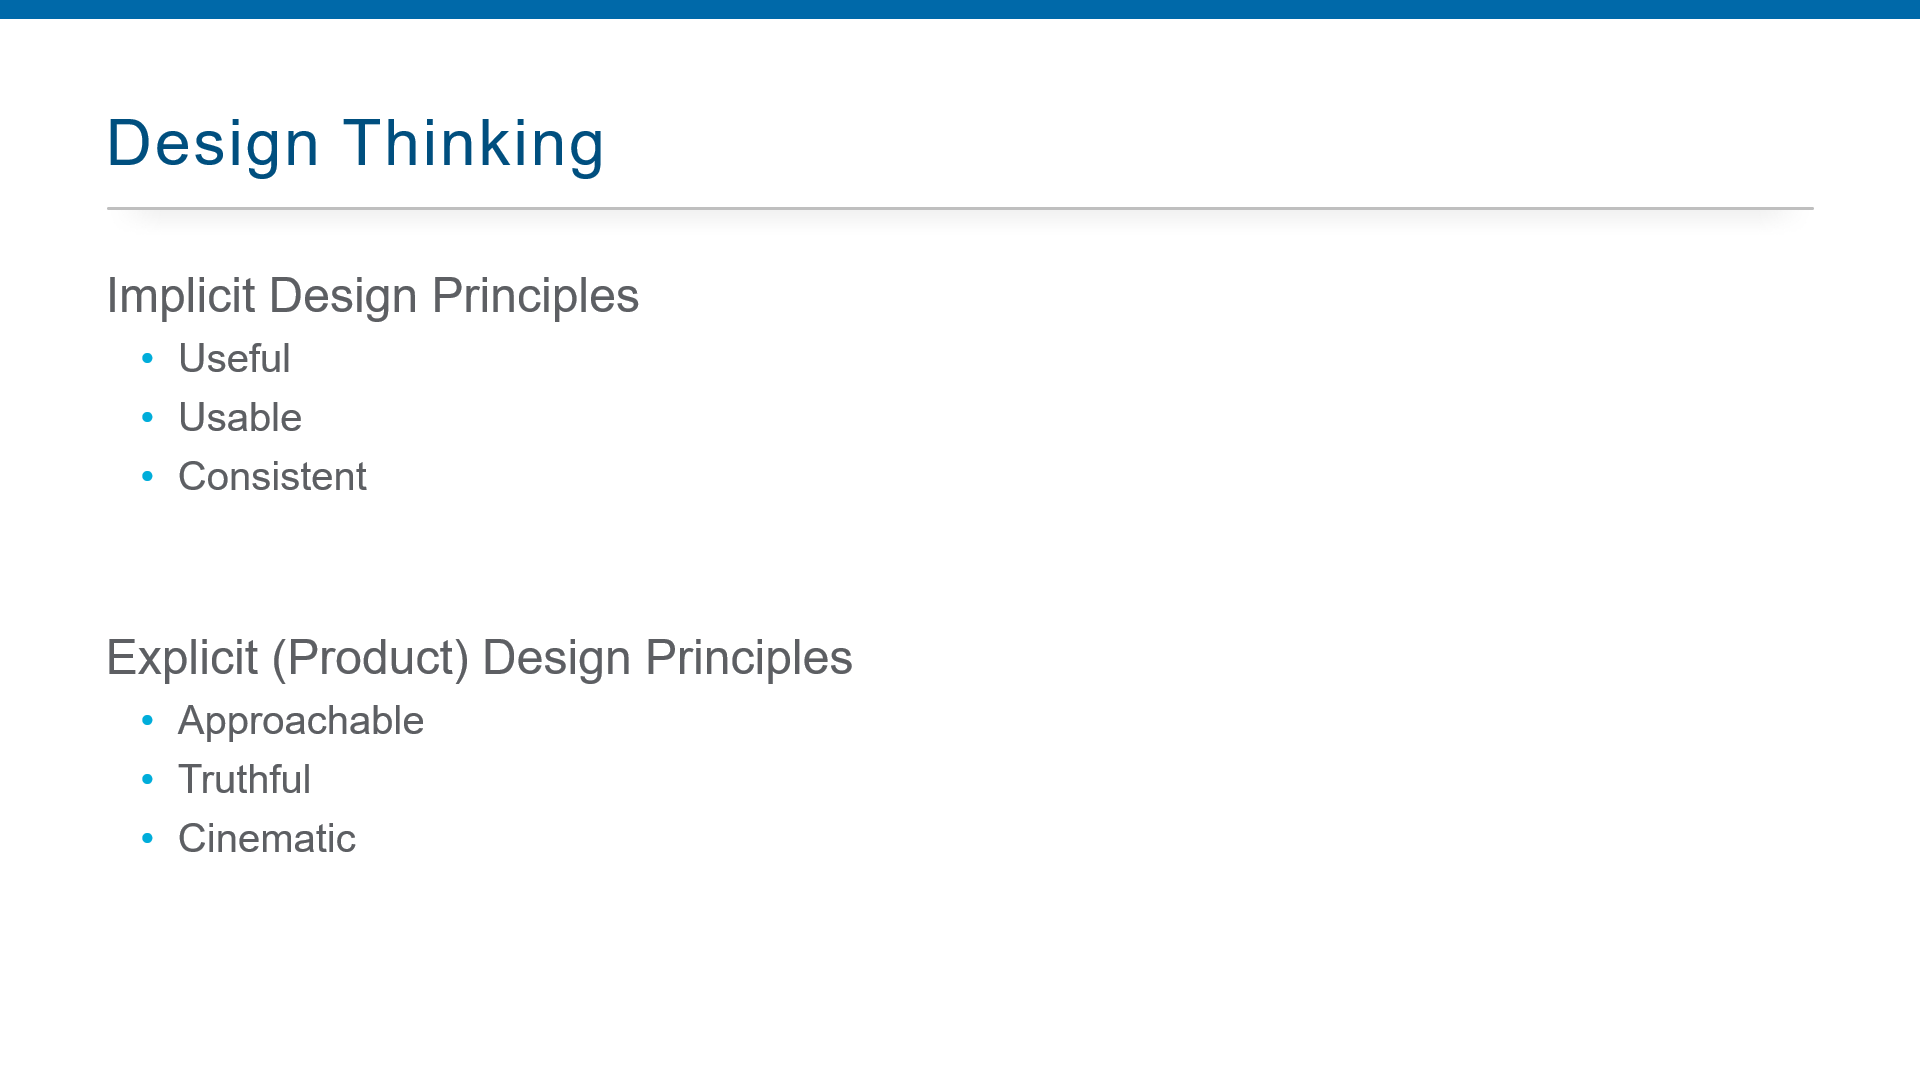 List of Implicit and Product design principles